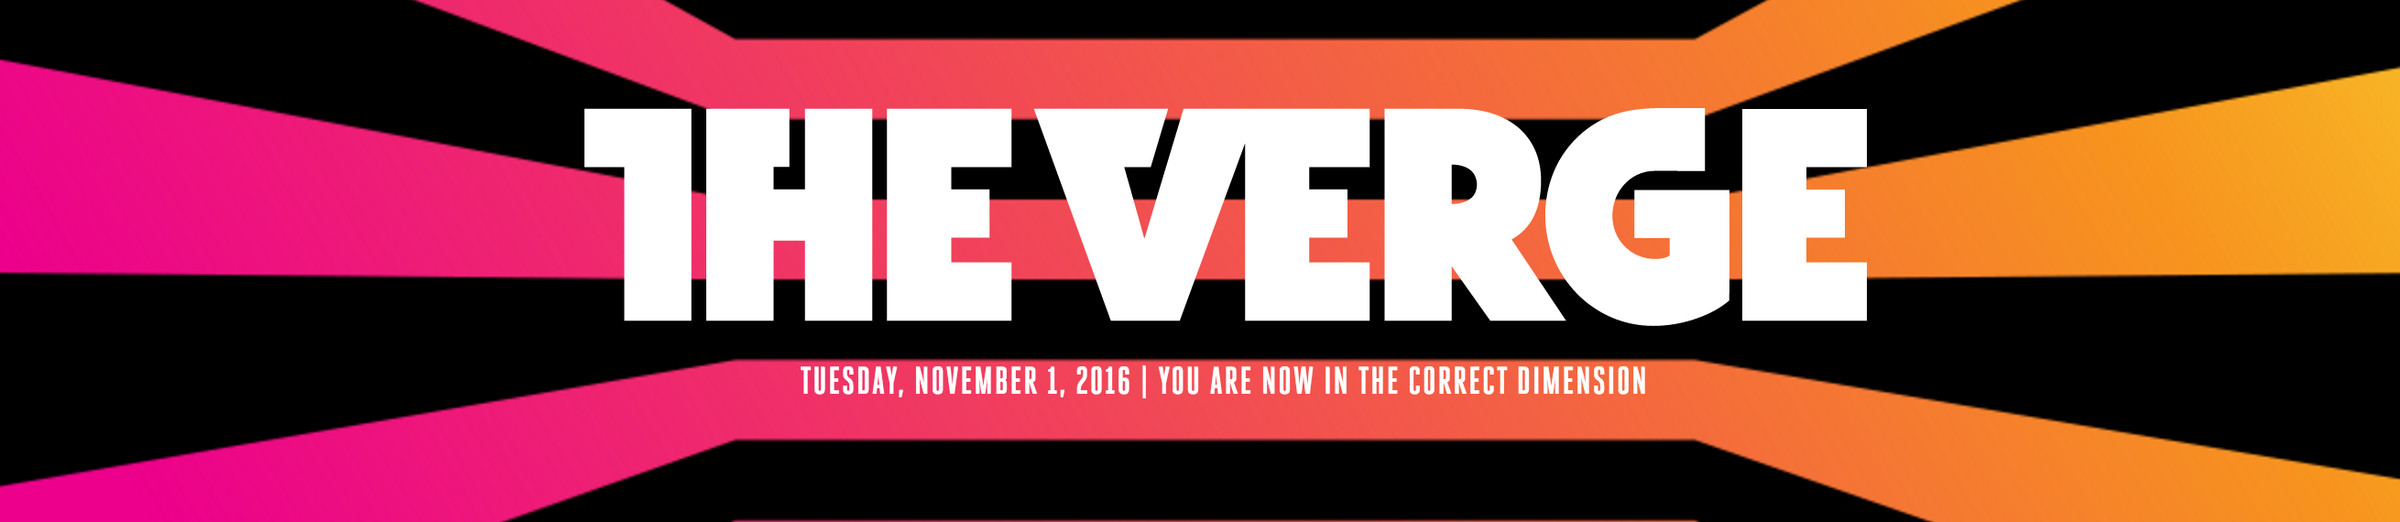 The Verge’s new dynamic header and tagline